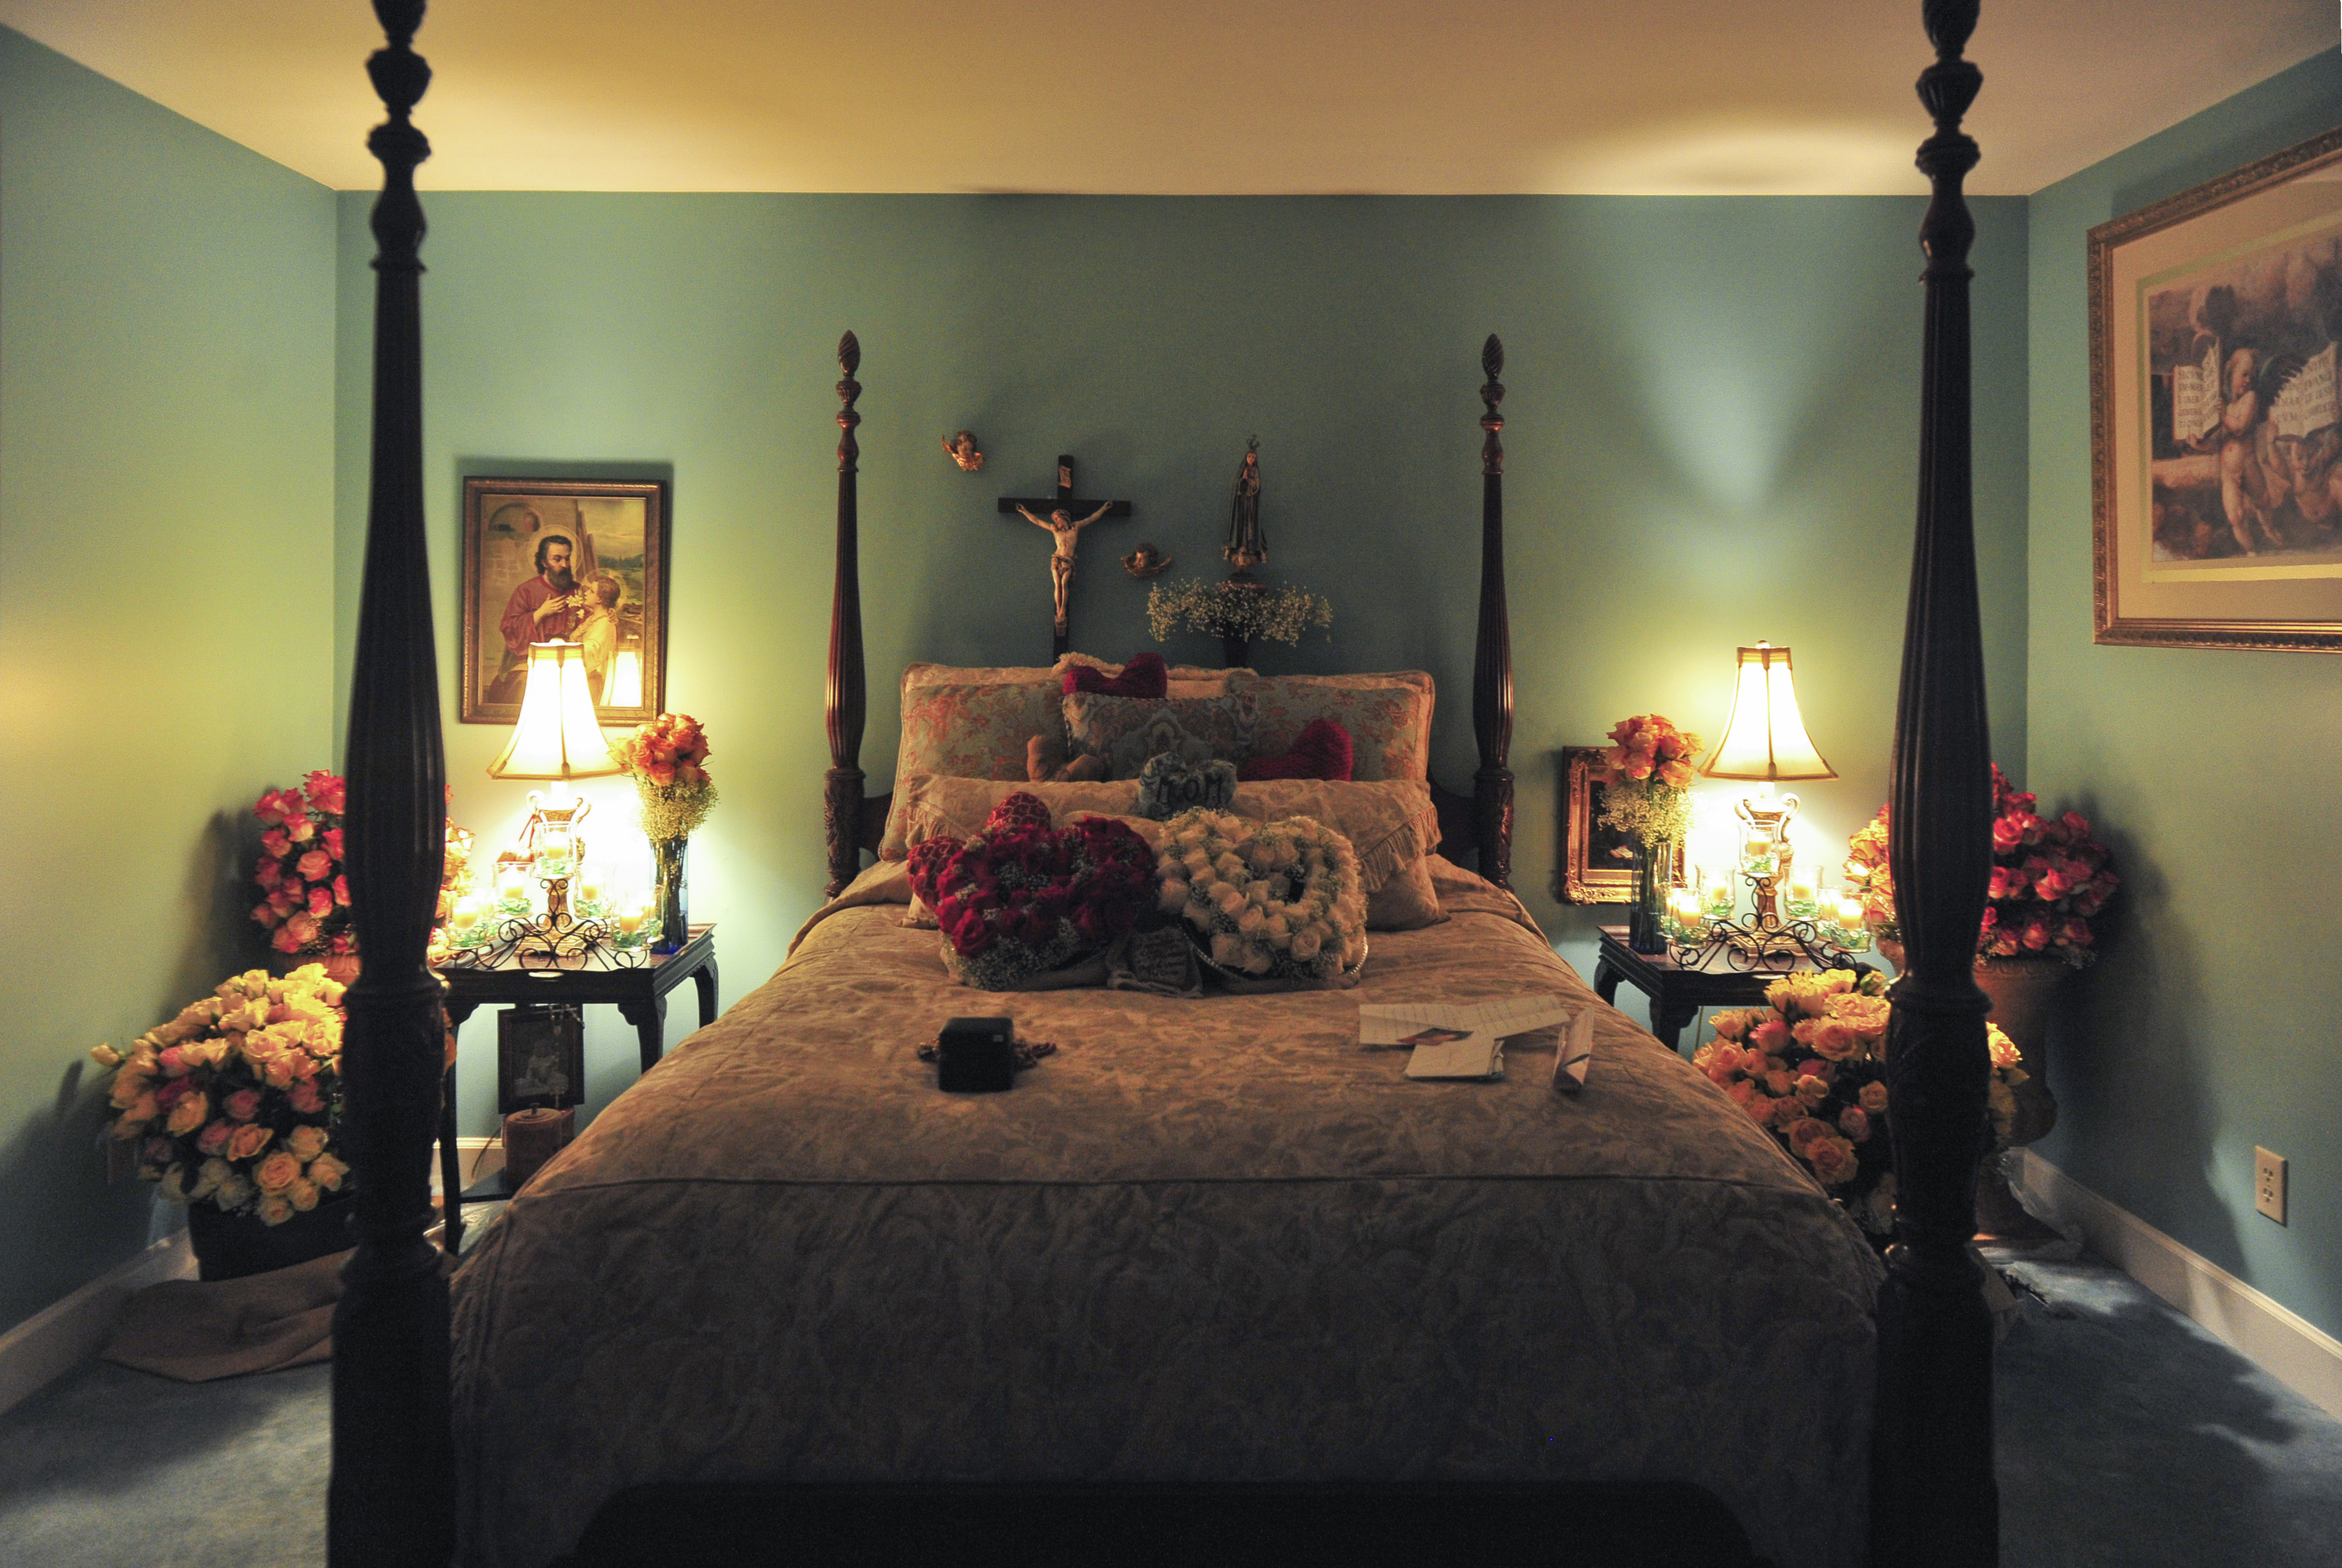 Bedroom of Apparitions